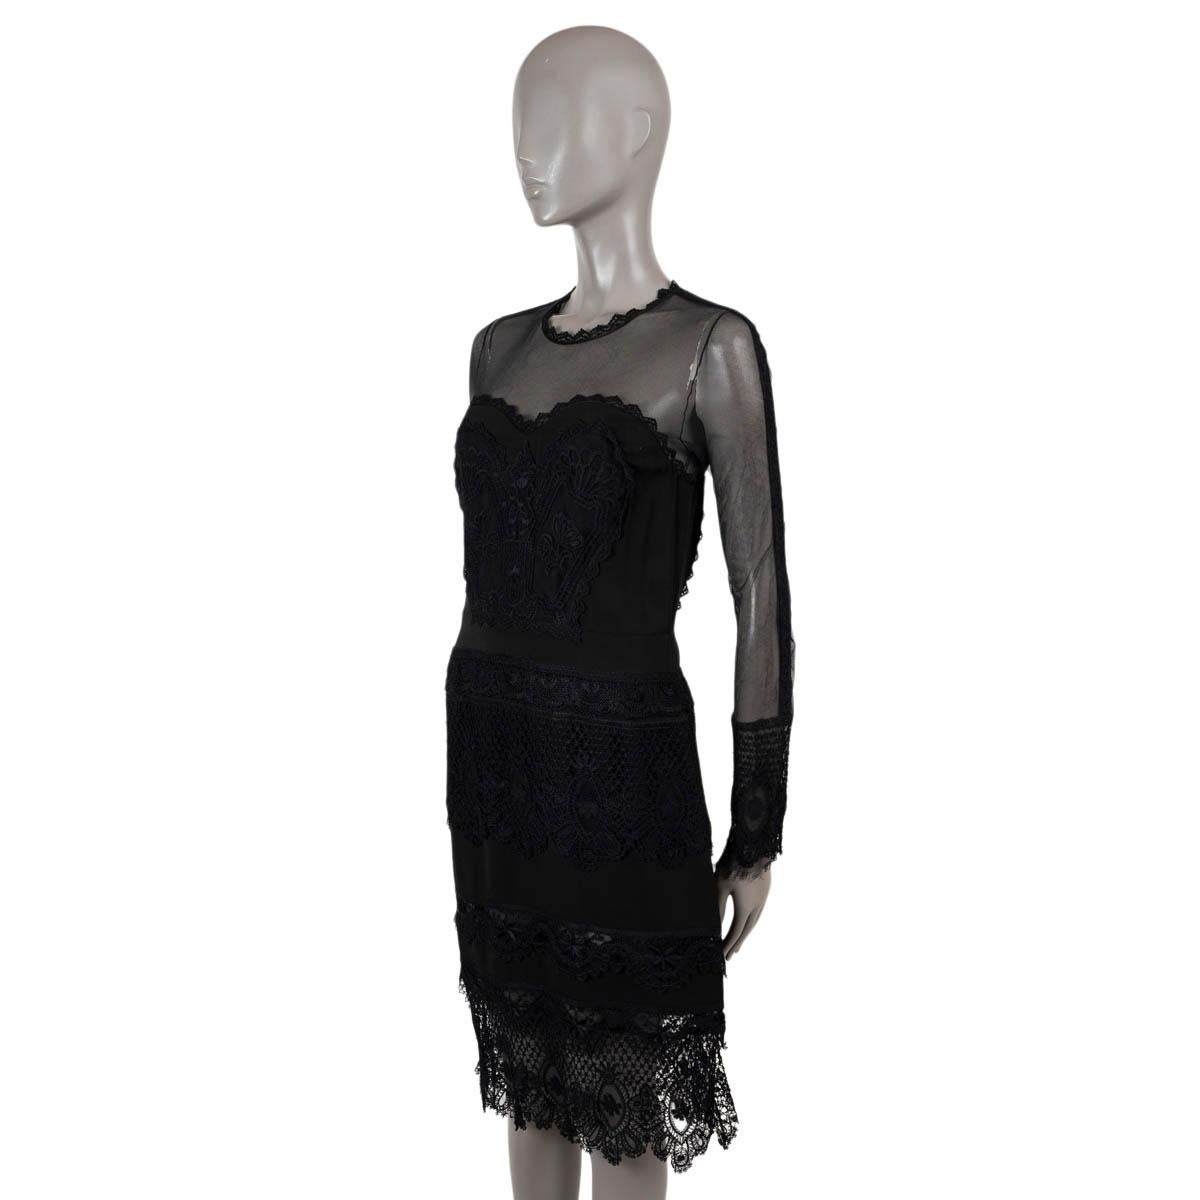 100% authenticTom Ford embroidered lace dress in black cotton (100%). Feattures a round lace-trimmed neck, long tulle sleeves in silk (100%) with embroidered cuffs. Opens with a silver zipper in the back and button. Unlined. Has been worn and is in